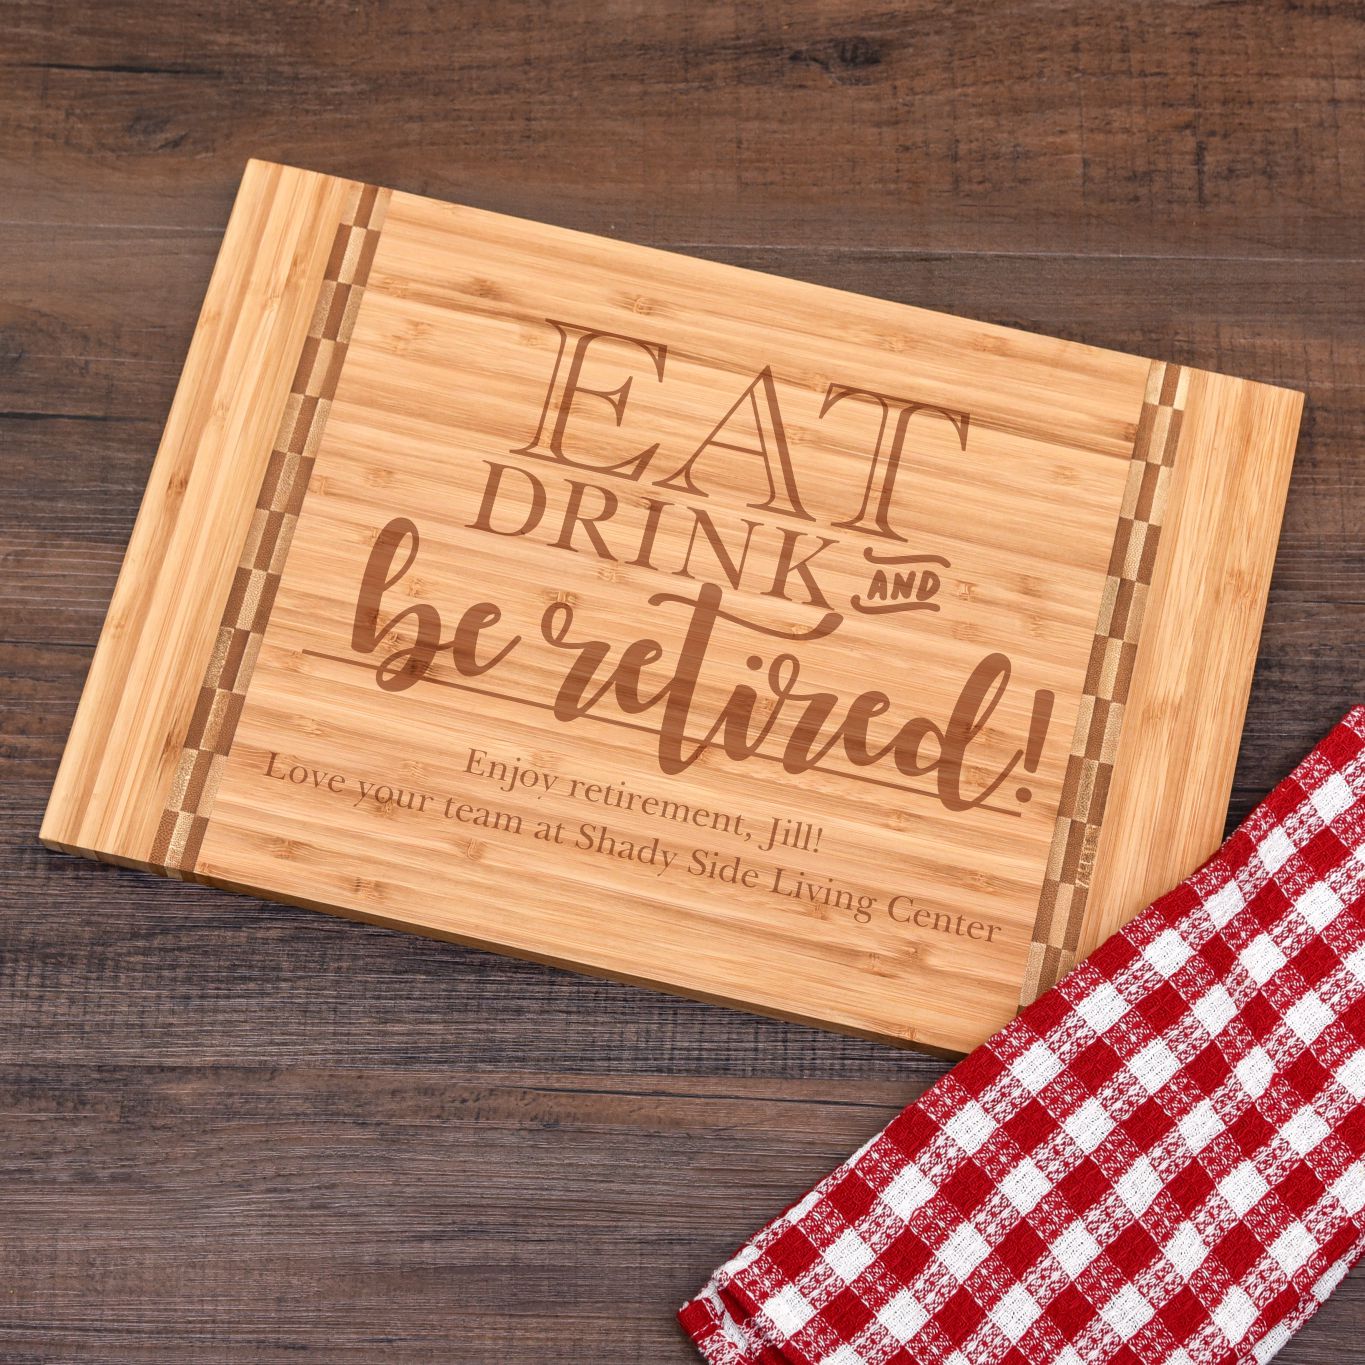 Eat, Drink & Be Retired Personalized Cutting Board